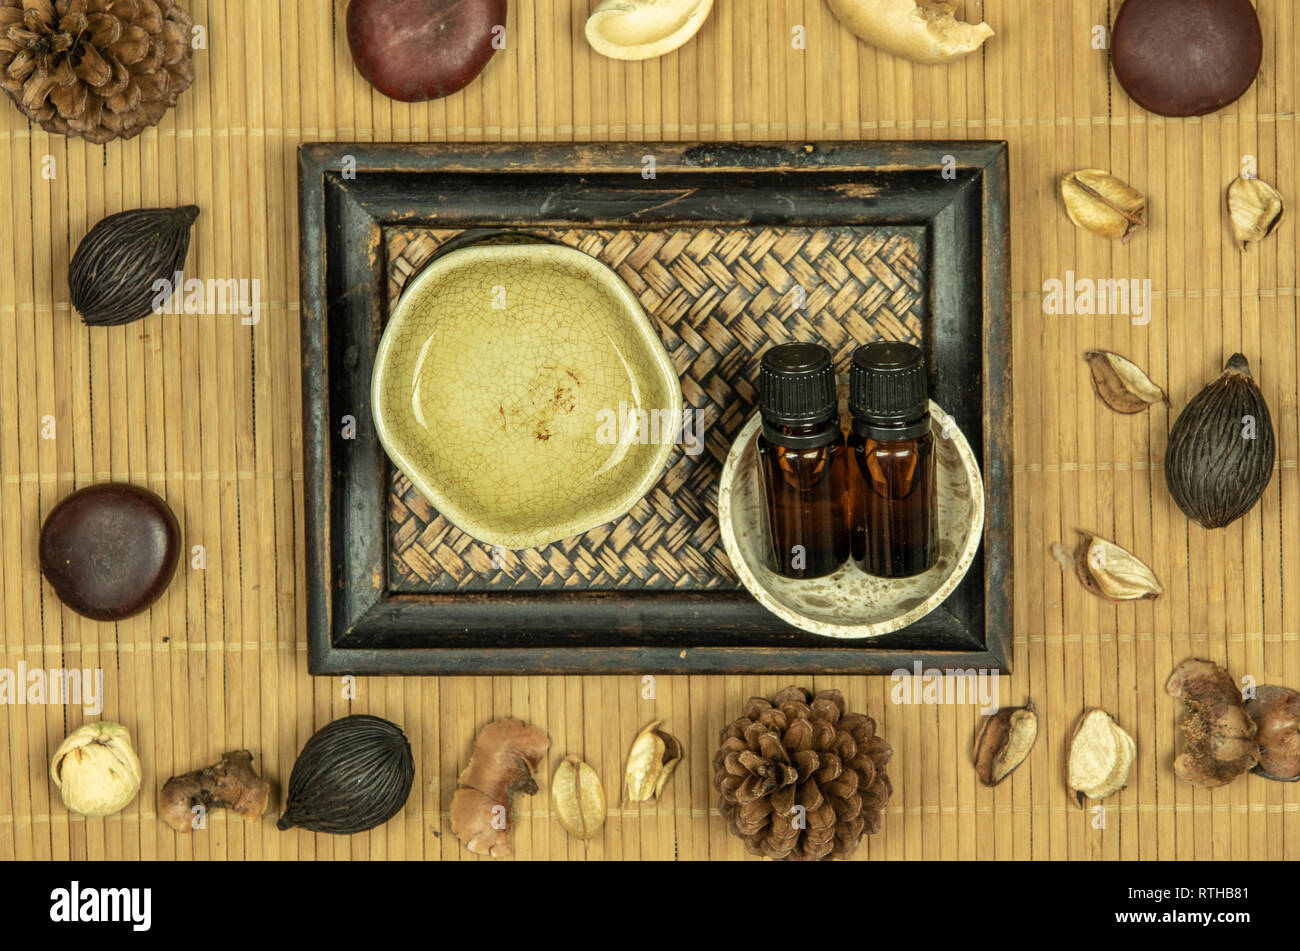 Aroma lamp with essential oil and potpourri on wooden bamboo mat background. Stock Photo